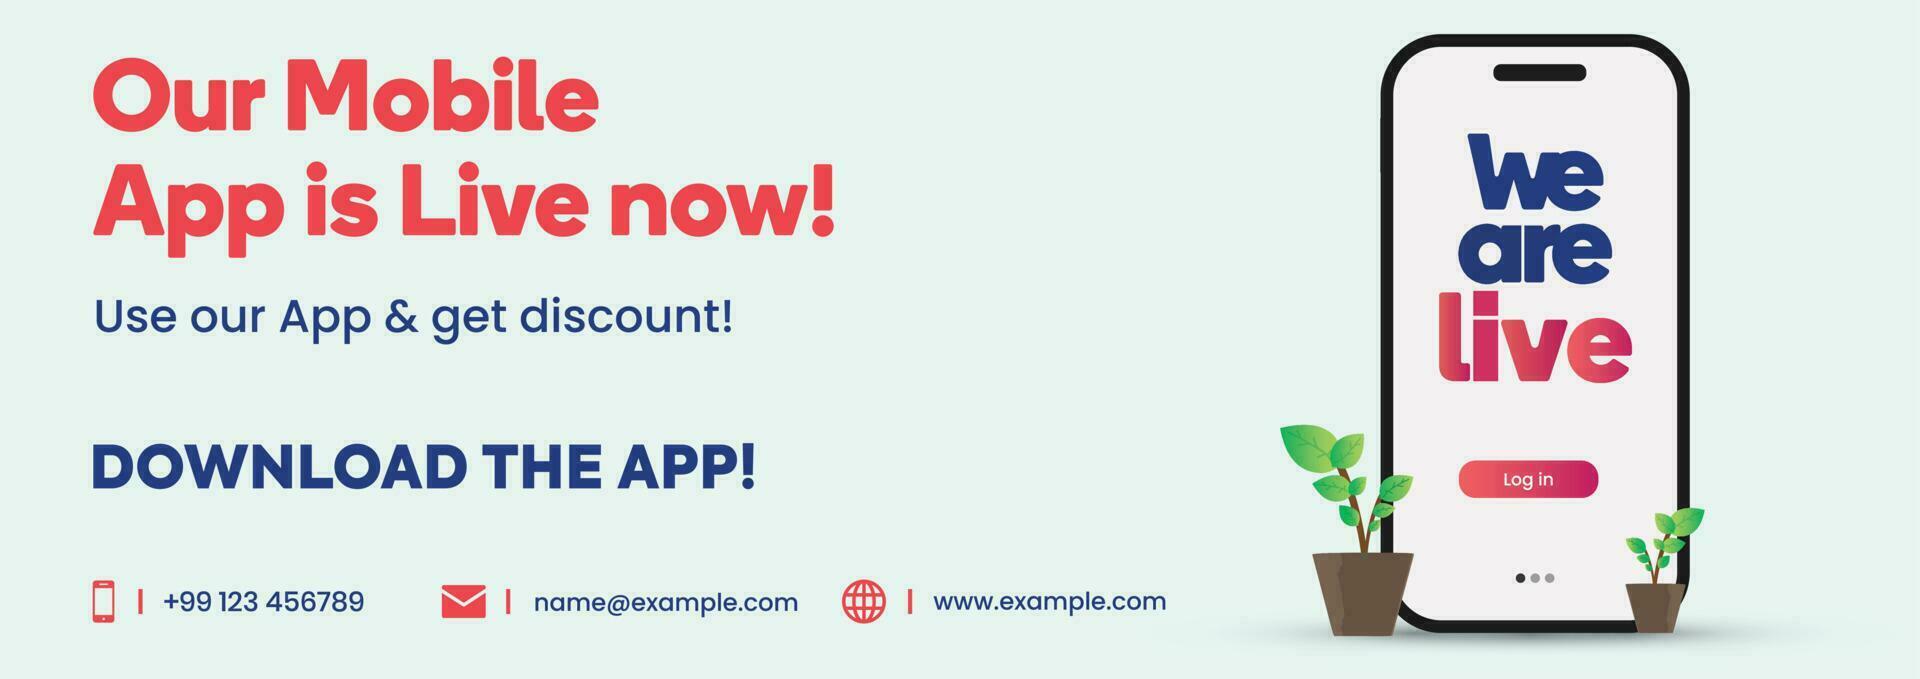 App launch cover. Mobile app is live now cover banner. Mobile application launch banner Join Us, Log in now. App launch. Use our app and get a discount. Download the app now. Launch marketing. vector